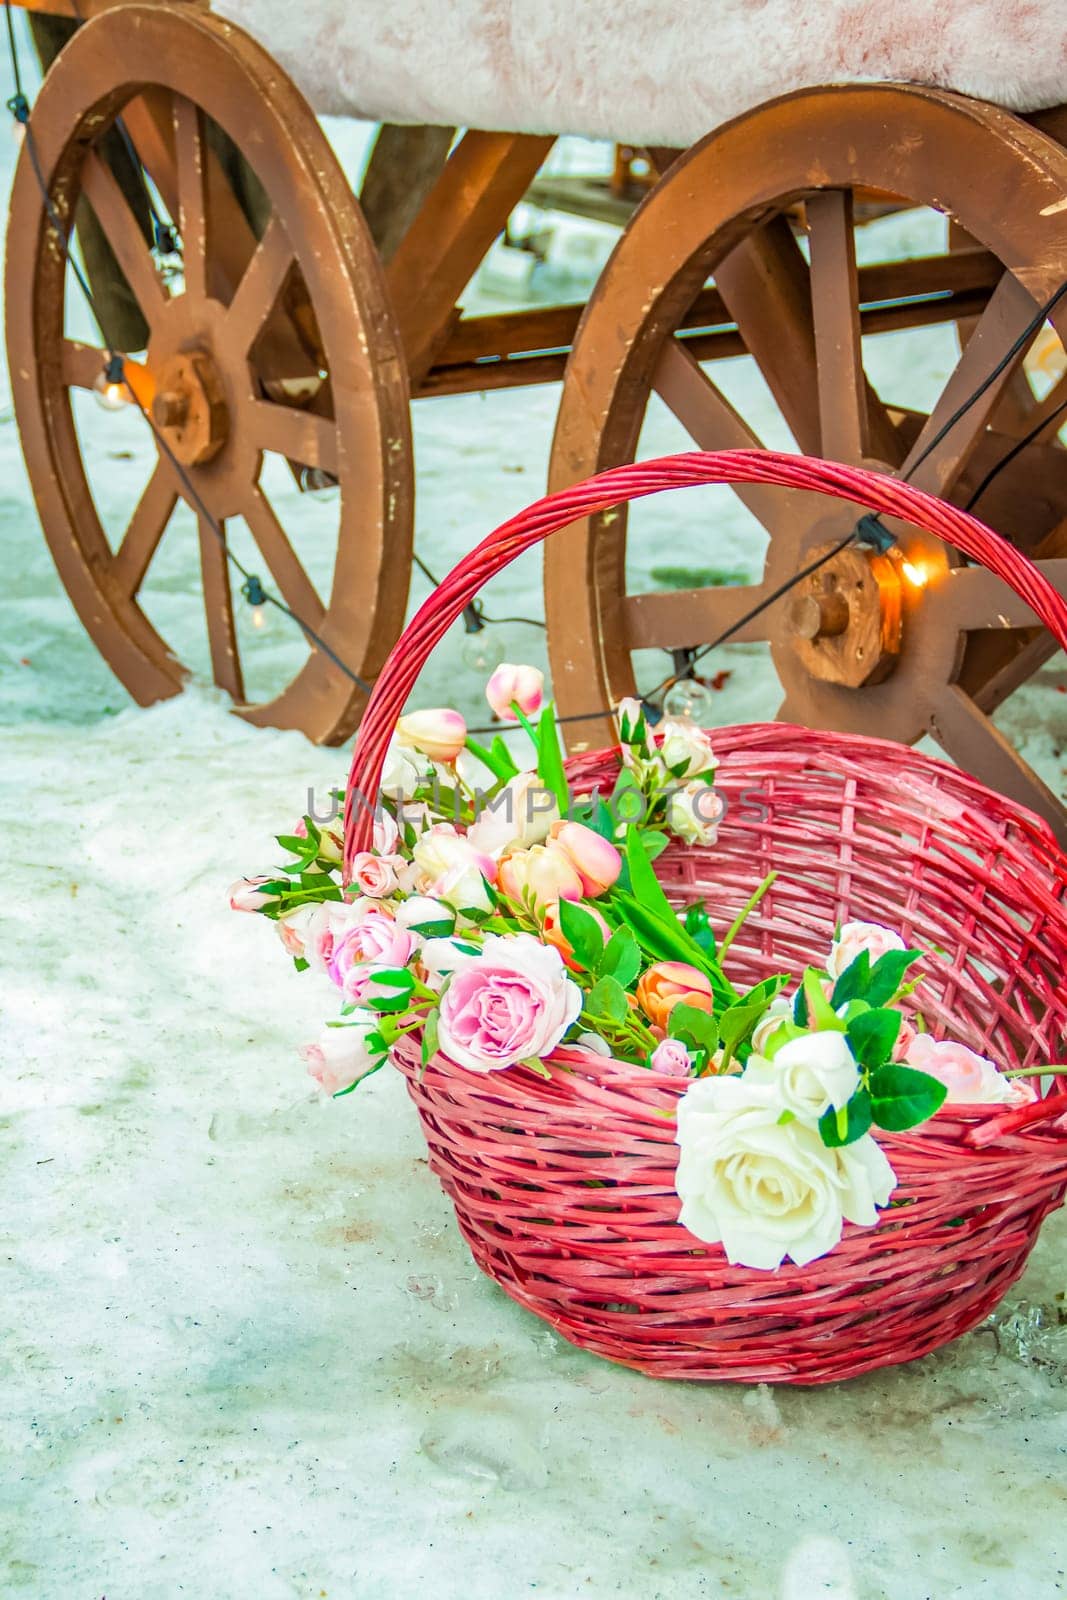 A wicker basket with beautiful flowers stands on the snow near the cart wheel. by Alina_Lebed